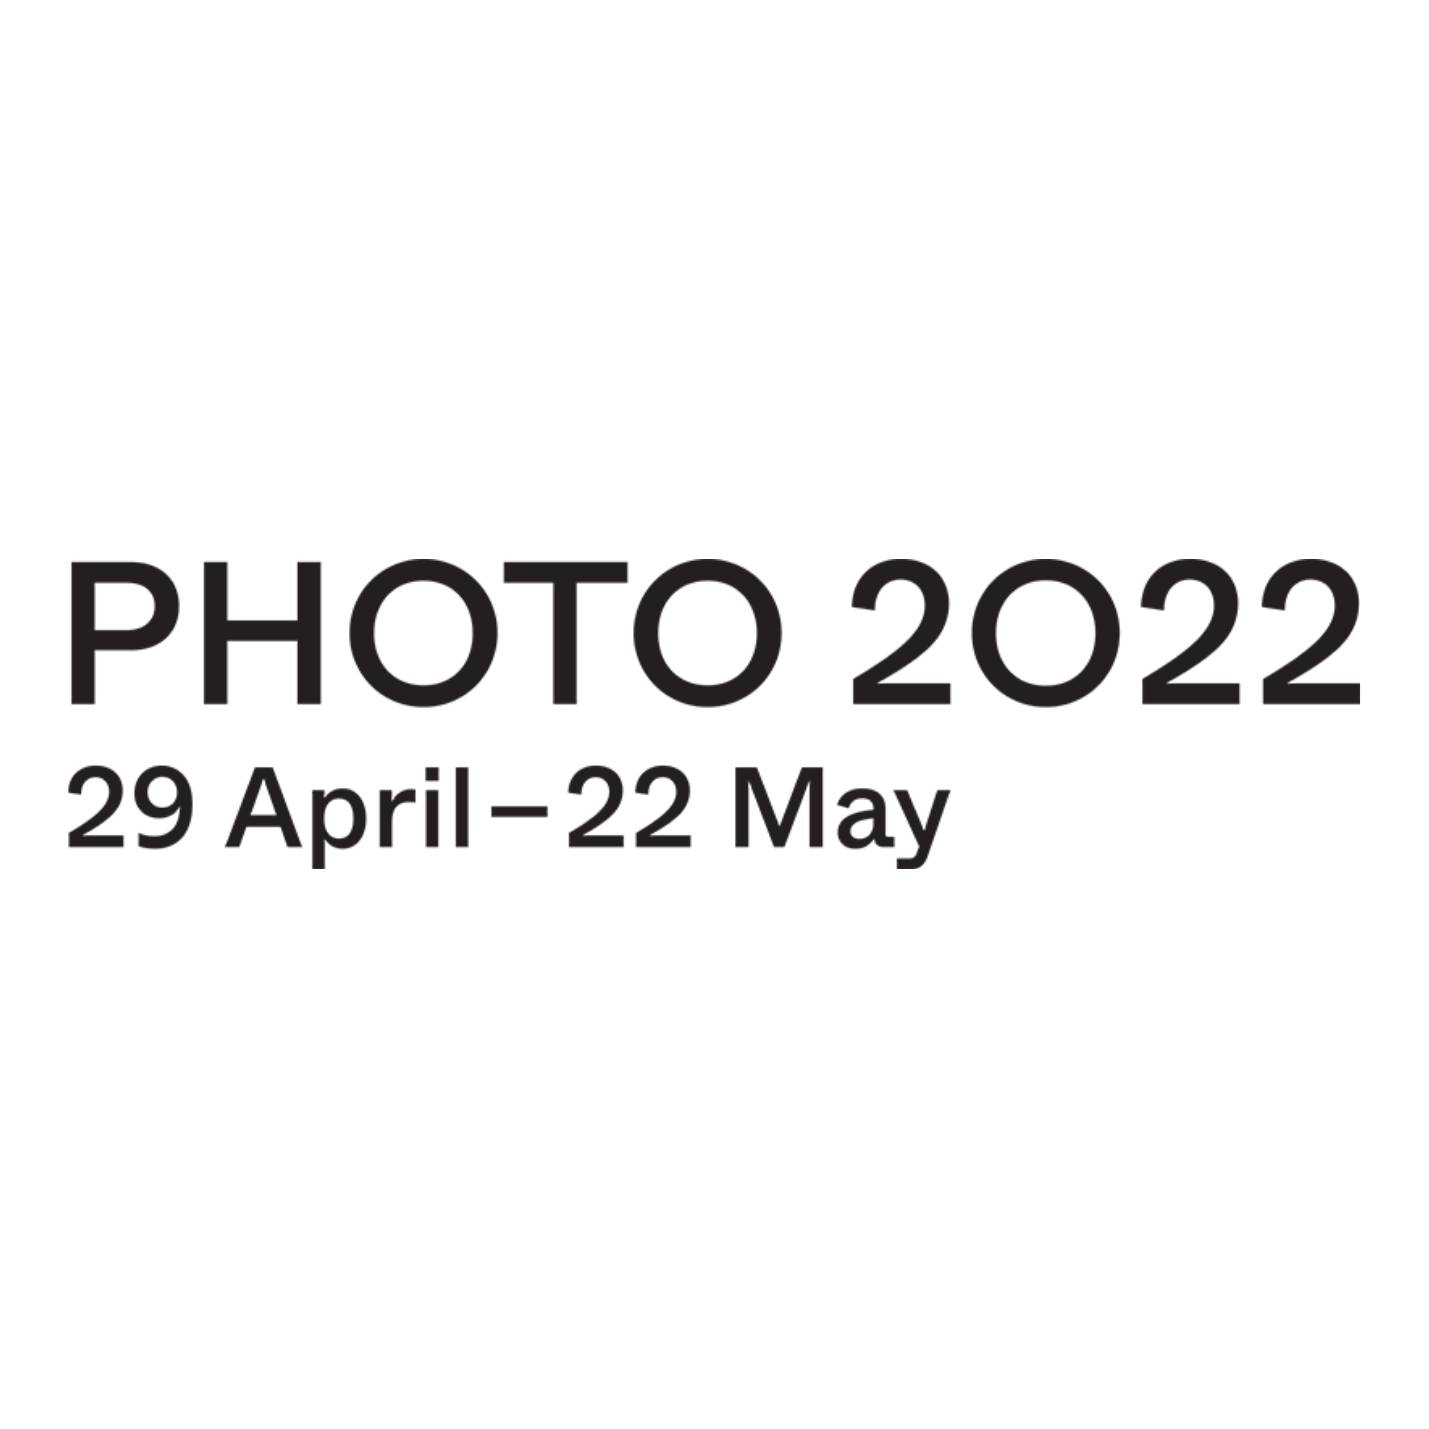 Black text on white background 'Photo 2022 29 April - 22 May